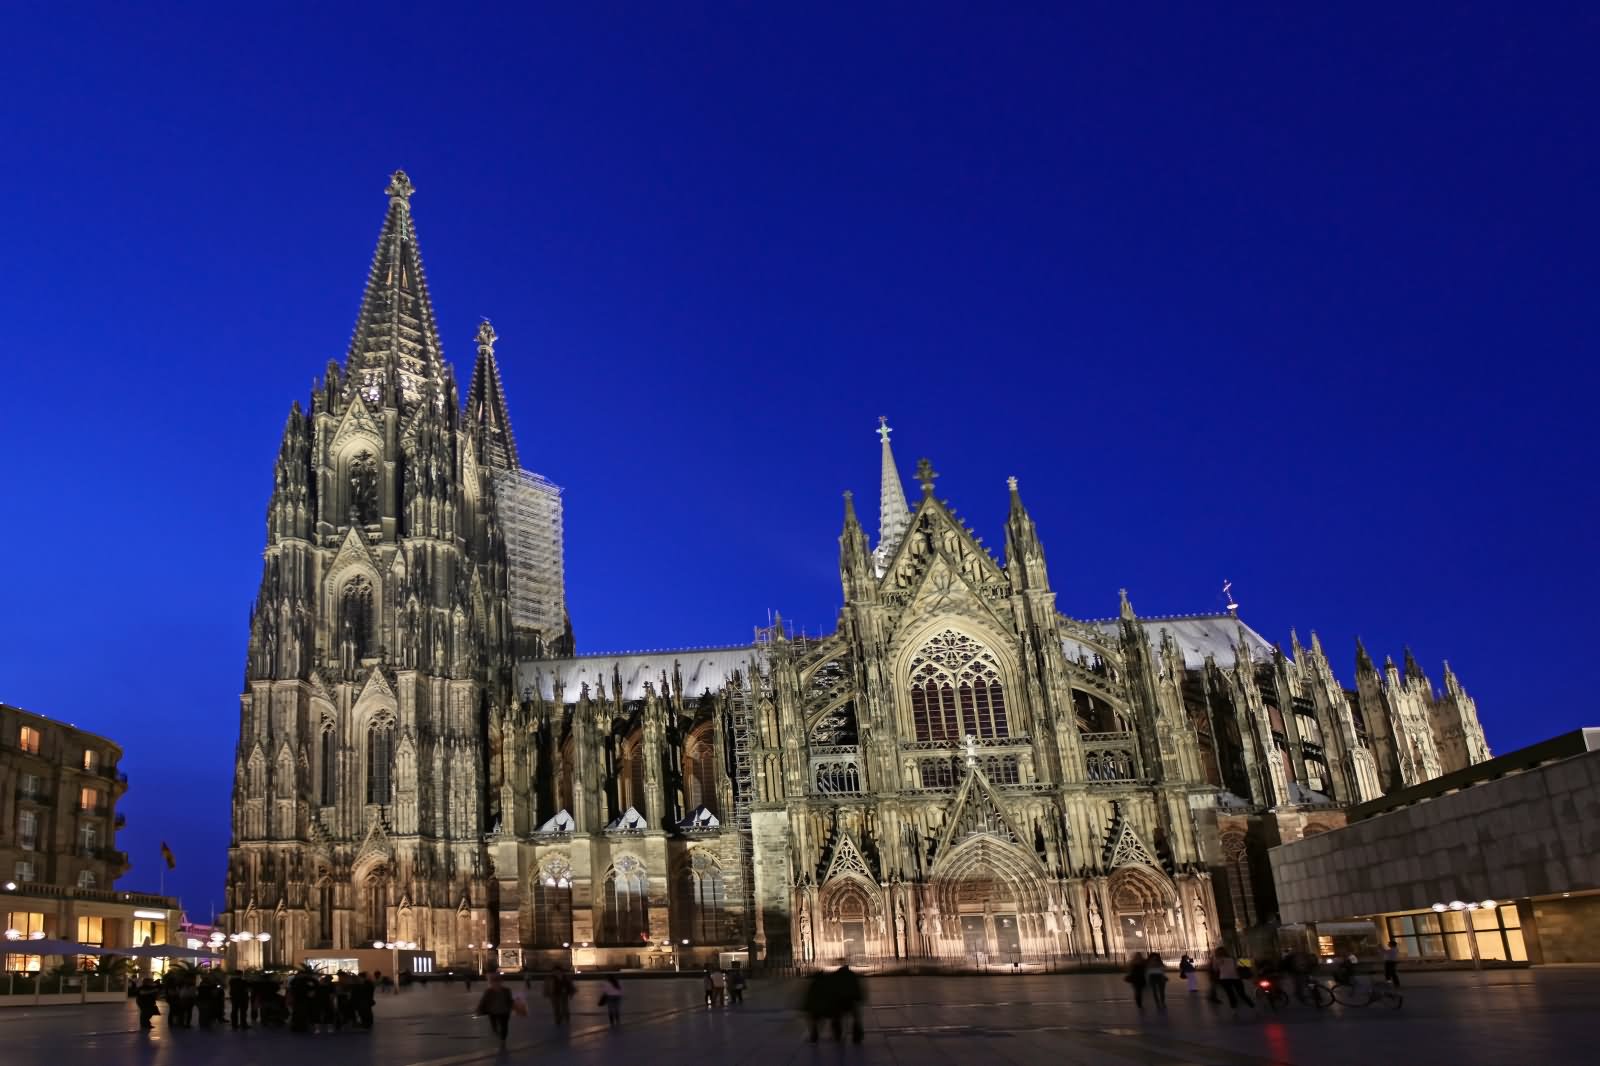 The Cologne Cathedral Illuminated At Night